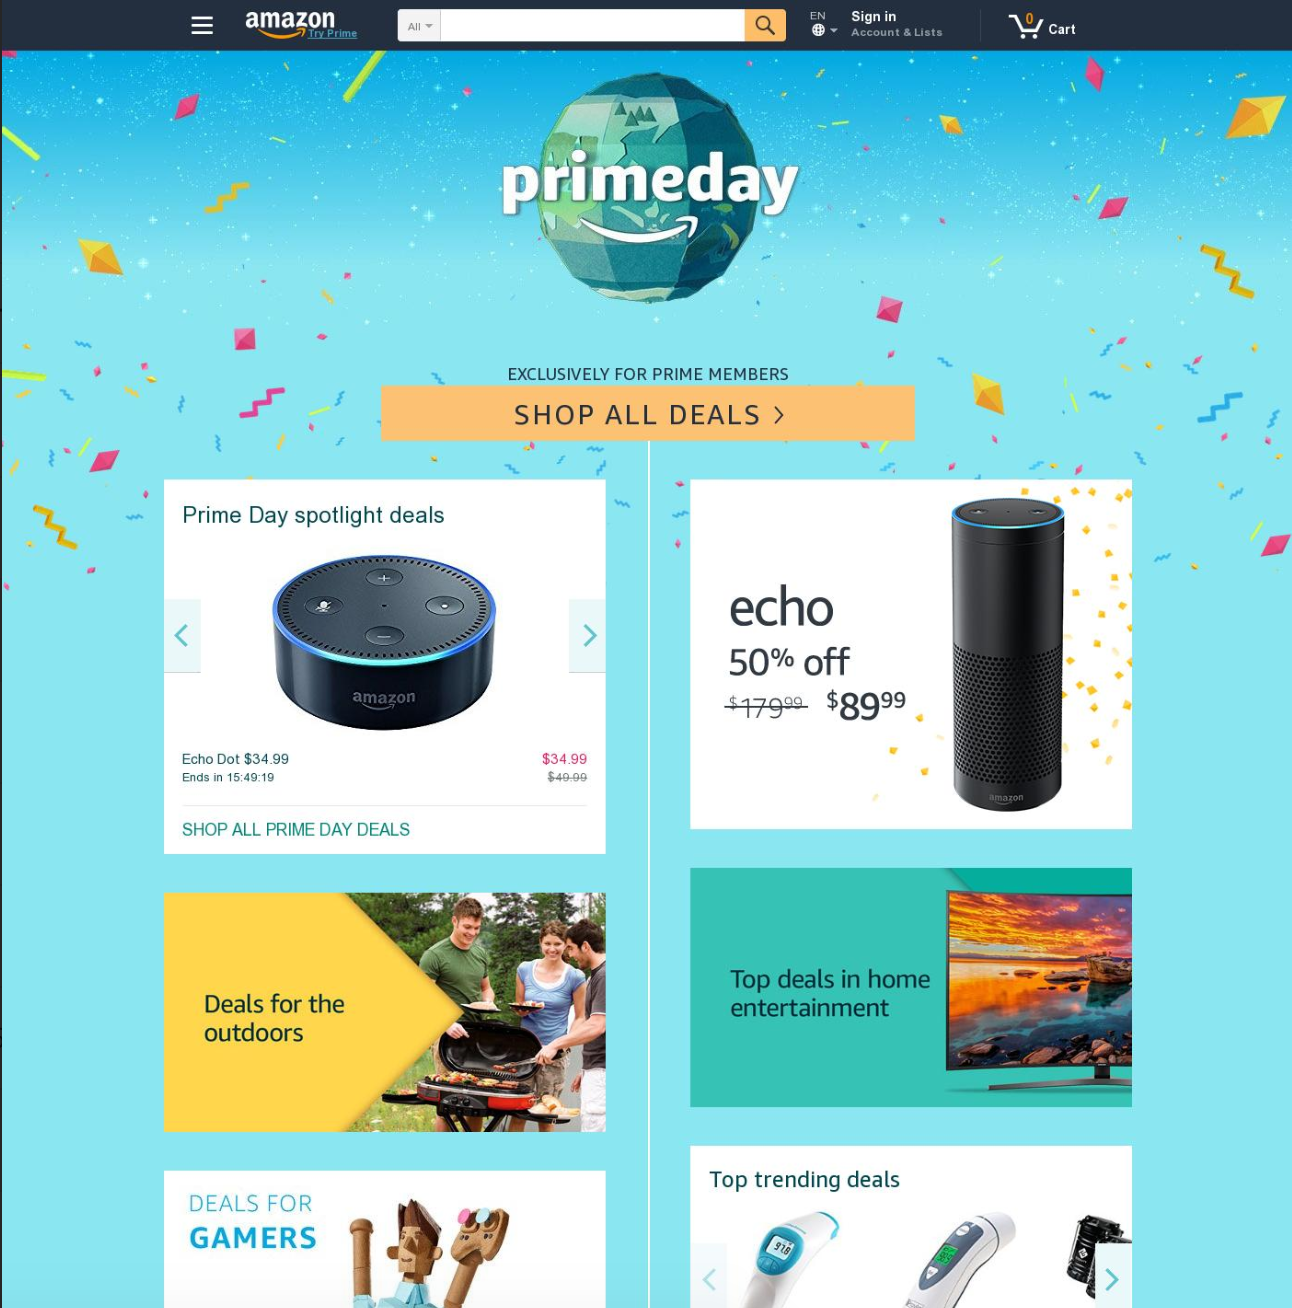 An image of Amazon's homepage on Prime Day 2017.